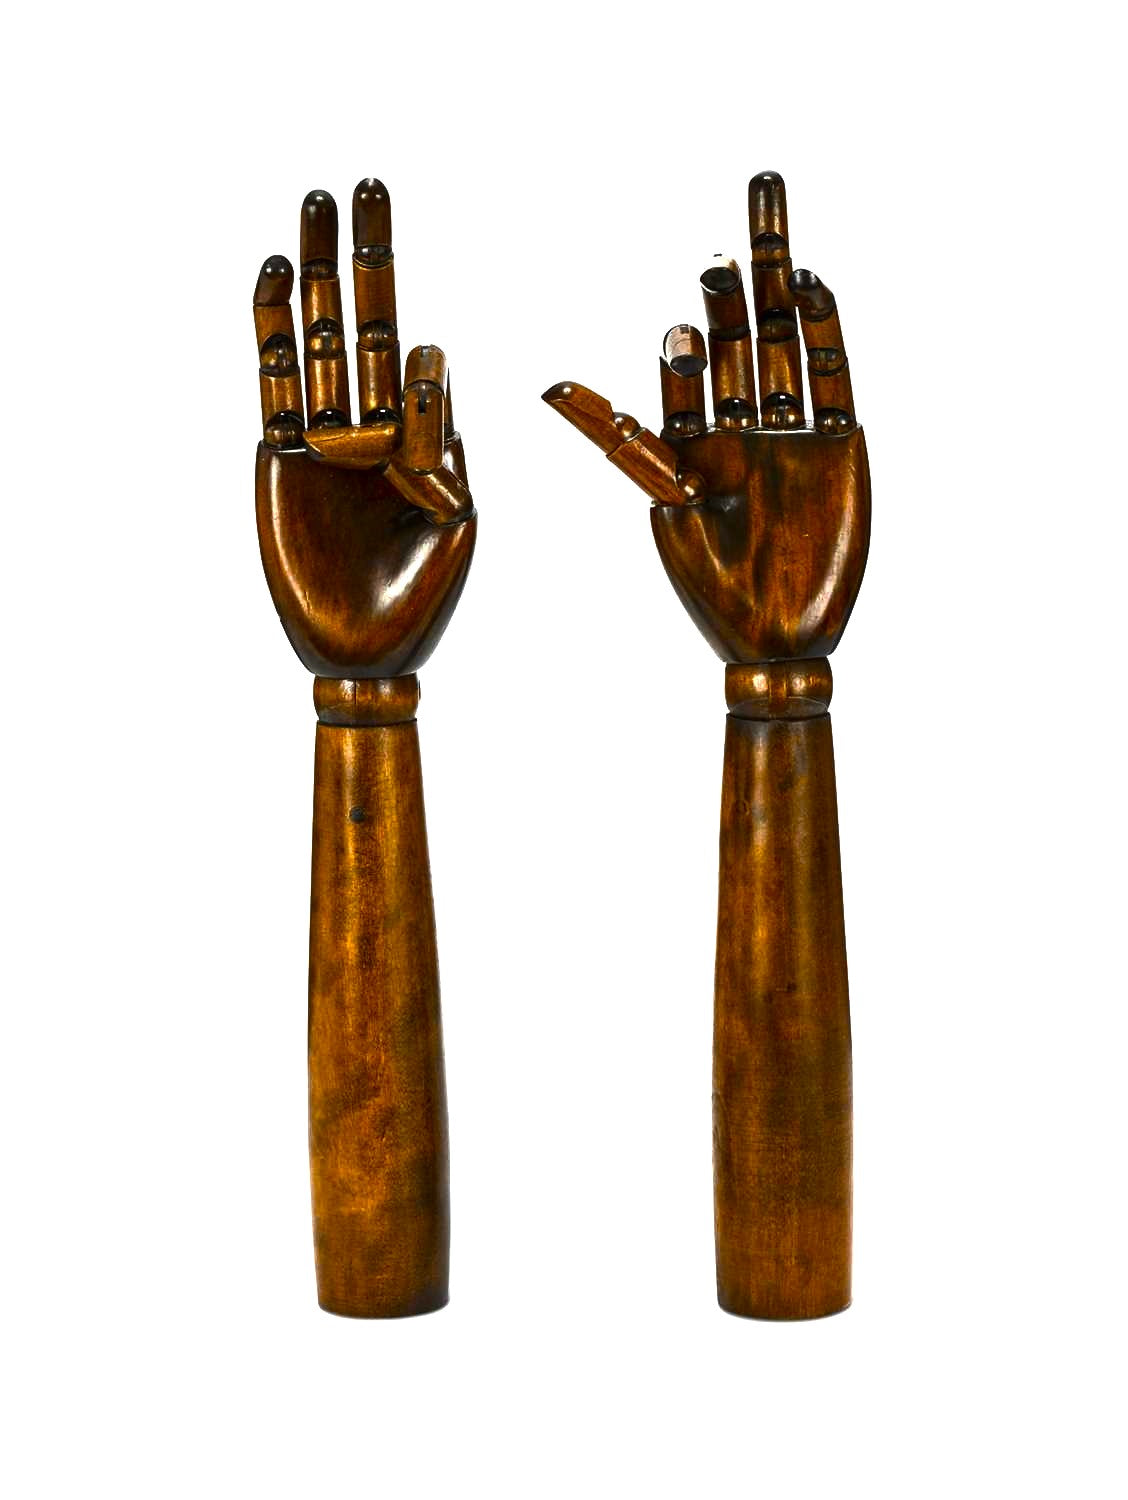 ANTIQUE LATE 19TH CENTURY ARTICULATED FOREARMS & HANDS FROM ARTIST'S LAY MODEL